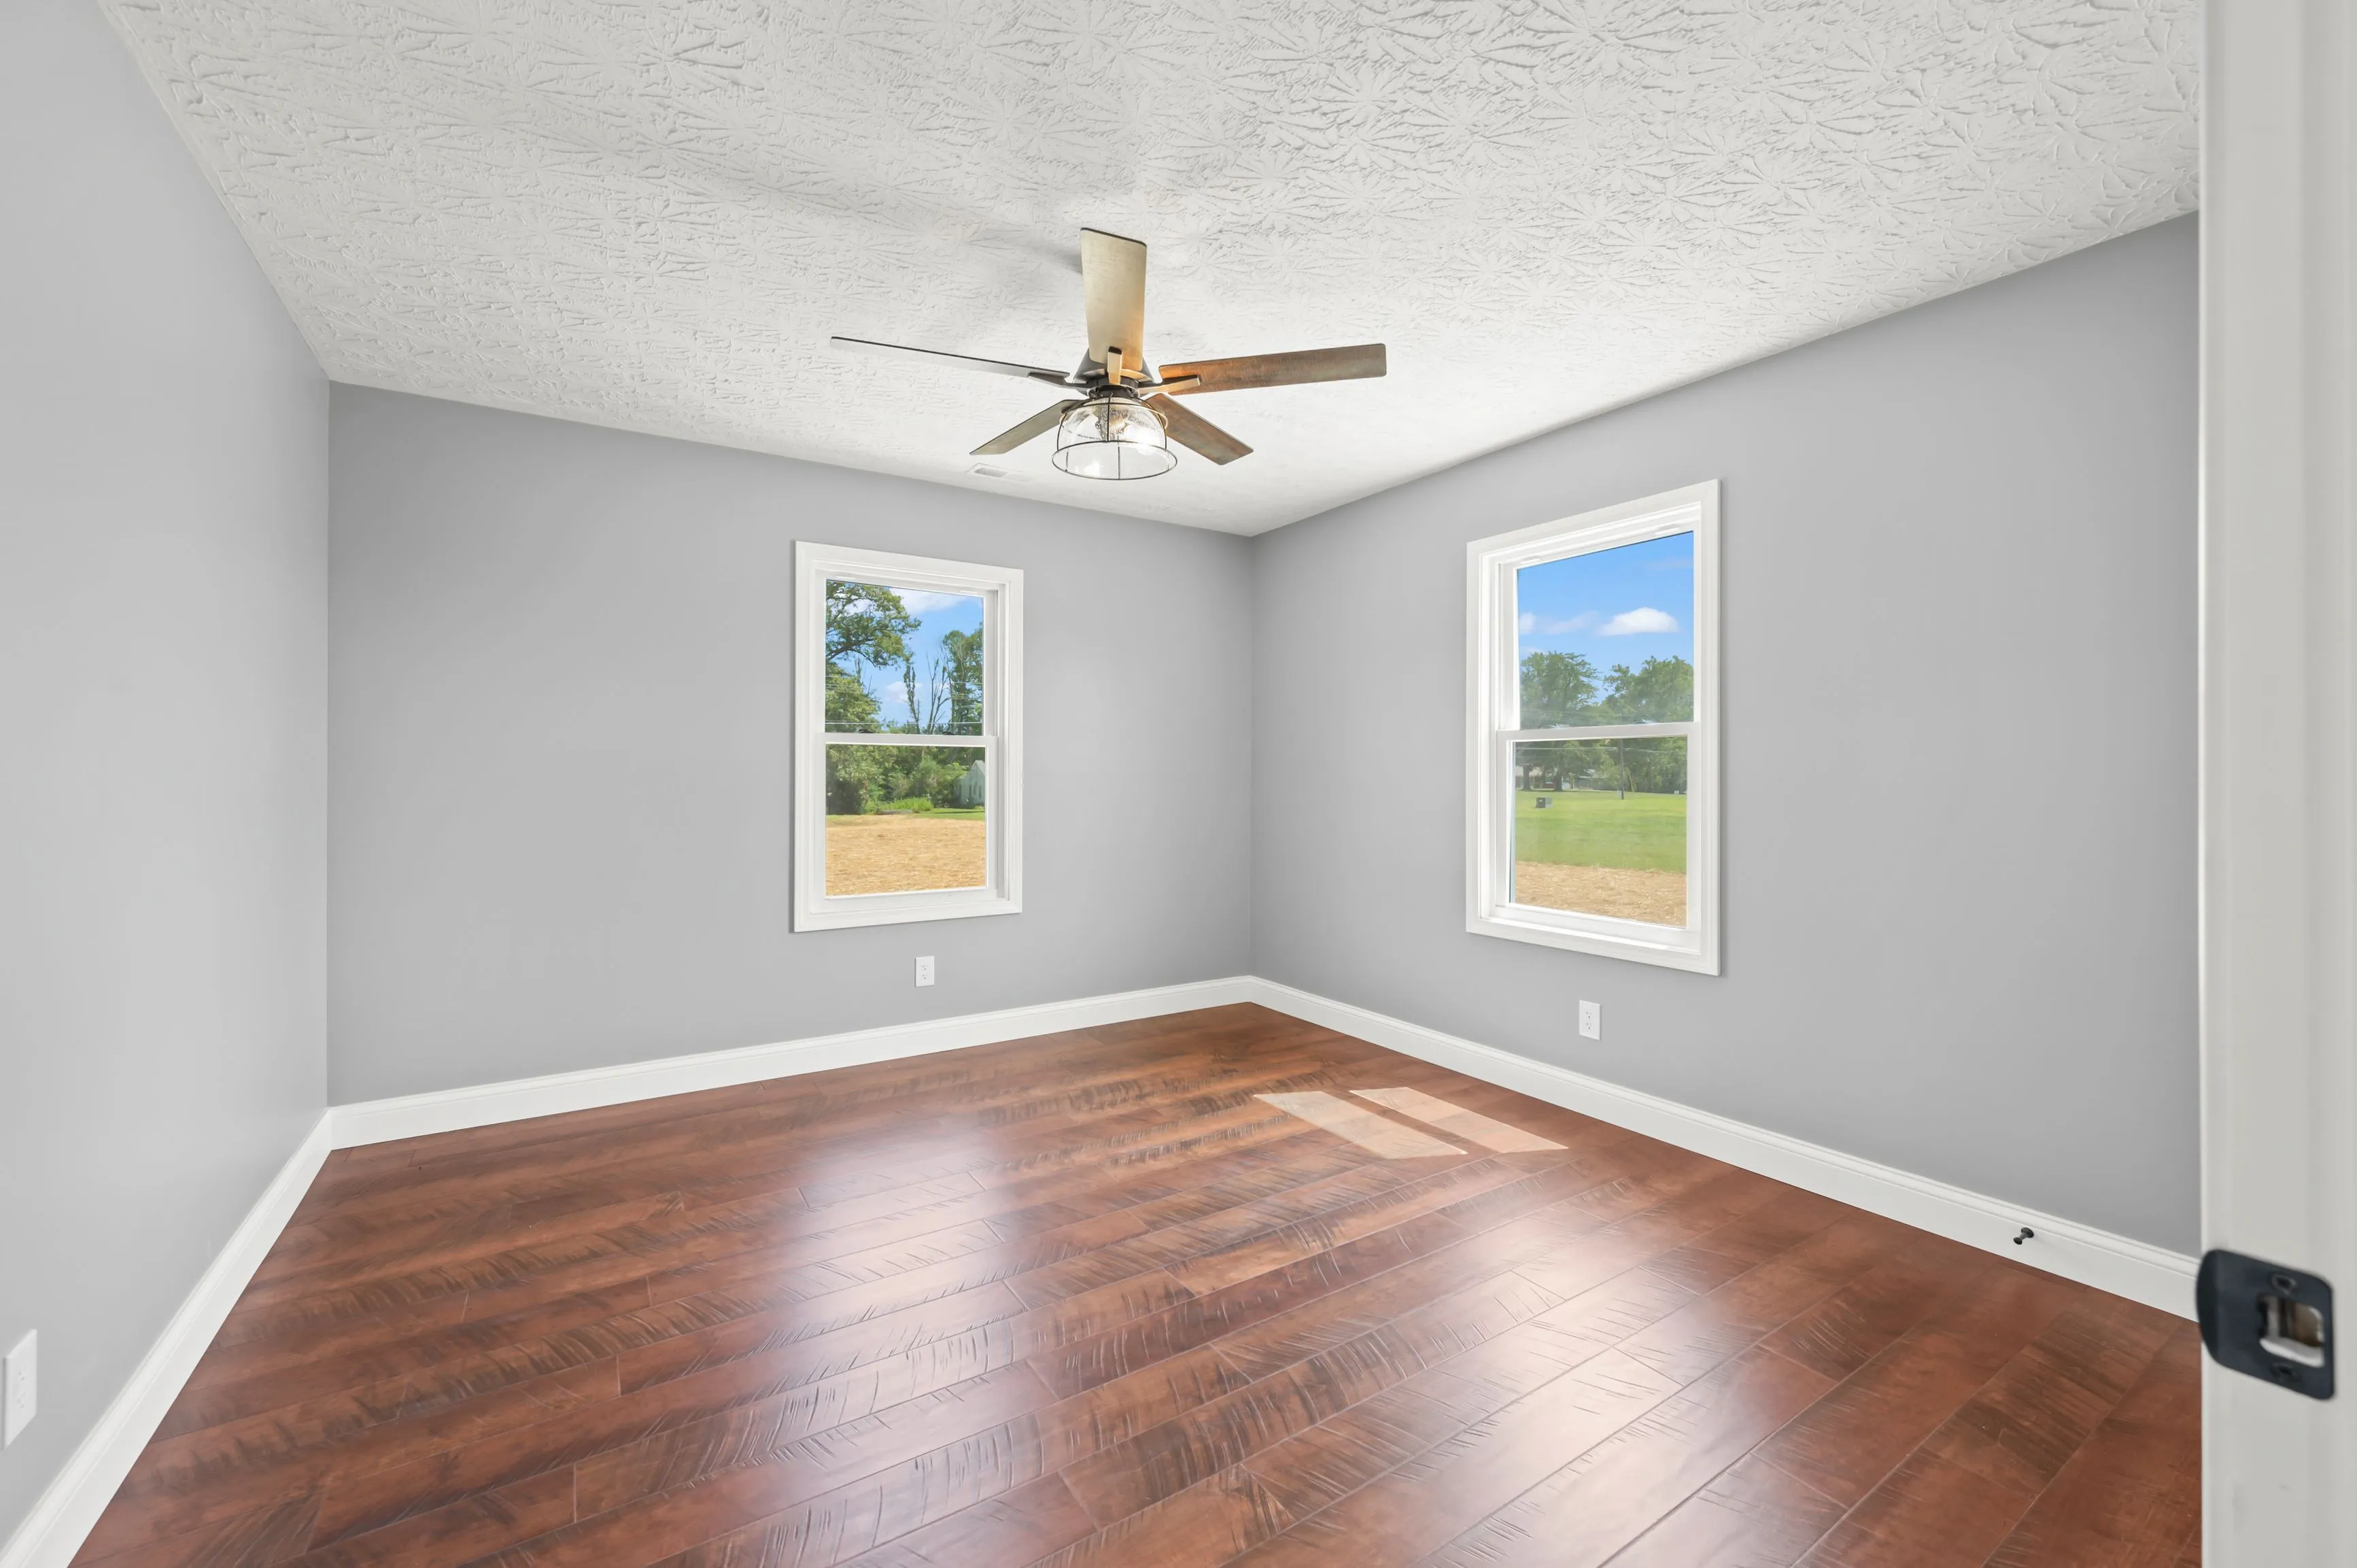 Empty room with gray walls, hardwood floors, a textured ceiling, and a ceiling fan, with two windows showing a view of trees and a lawn.